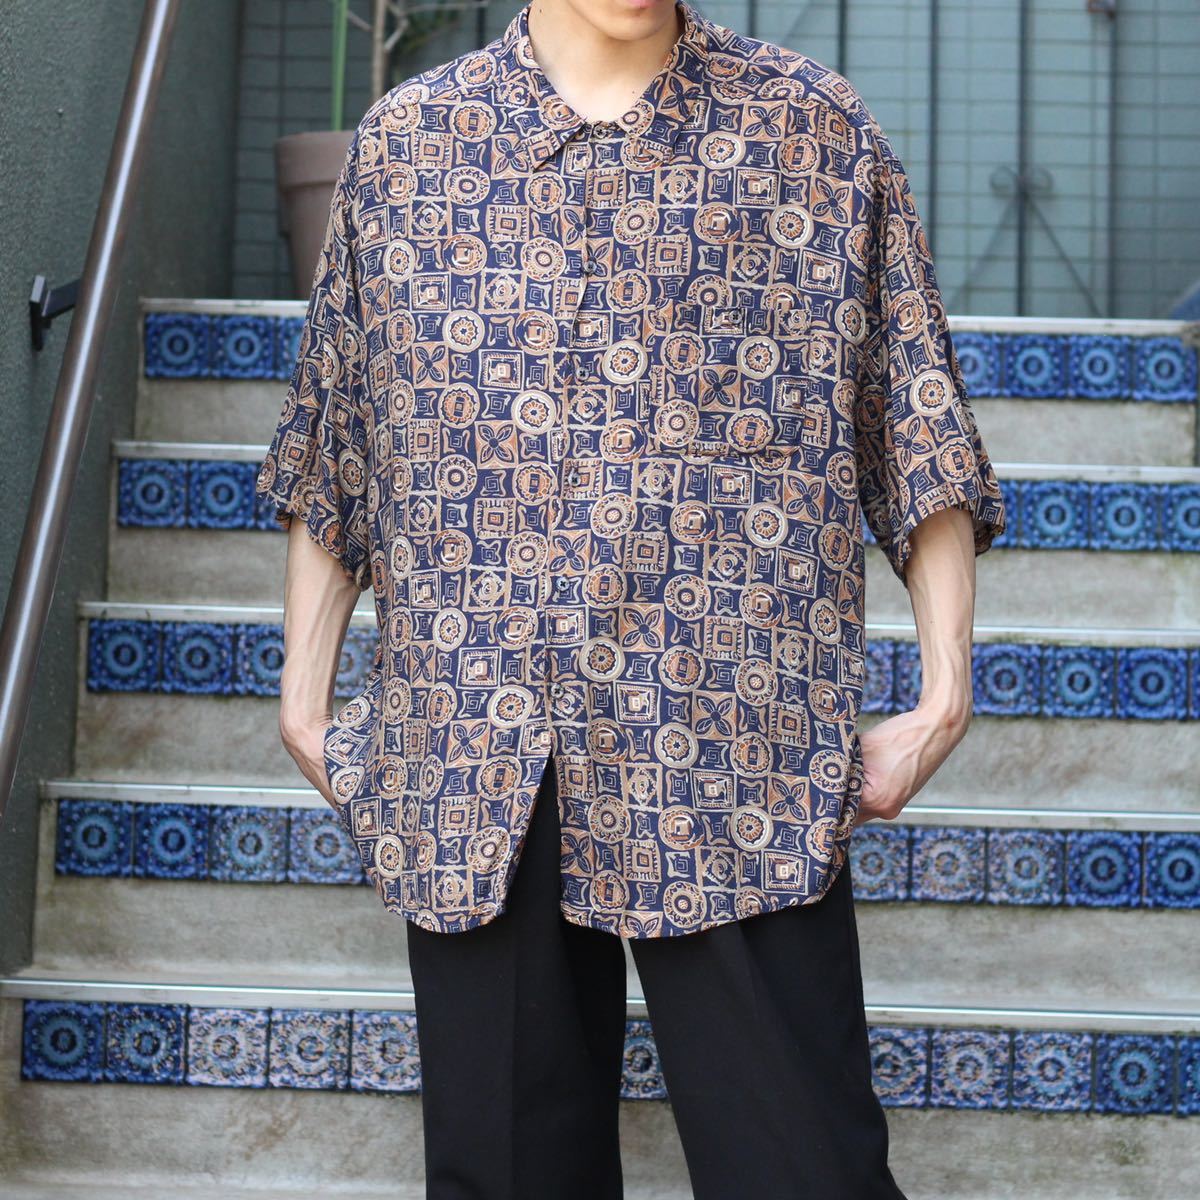 USA VINTAGE HALF SLEEVE PATTERNED ALL OVER SHIRT/アメリカ古着半袖総柄シャツ